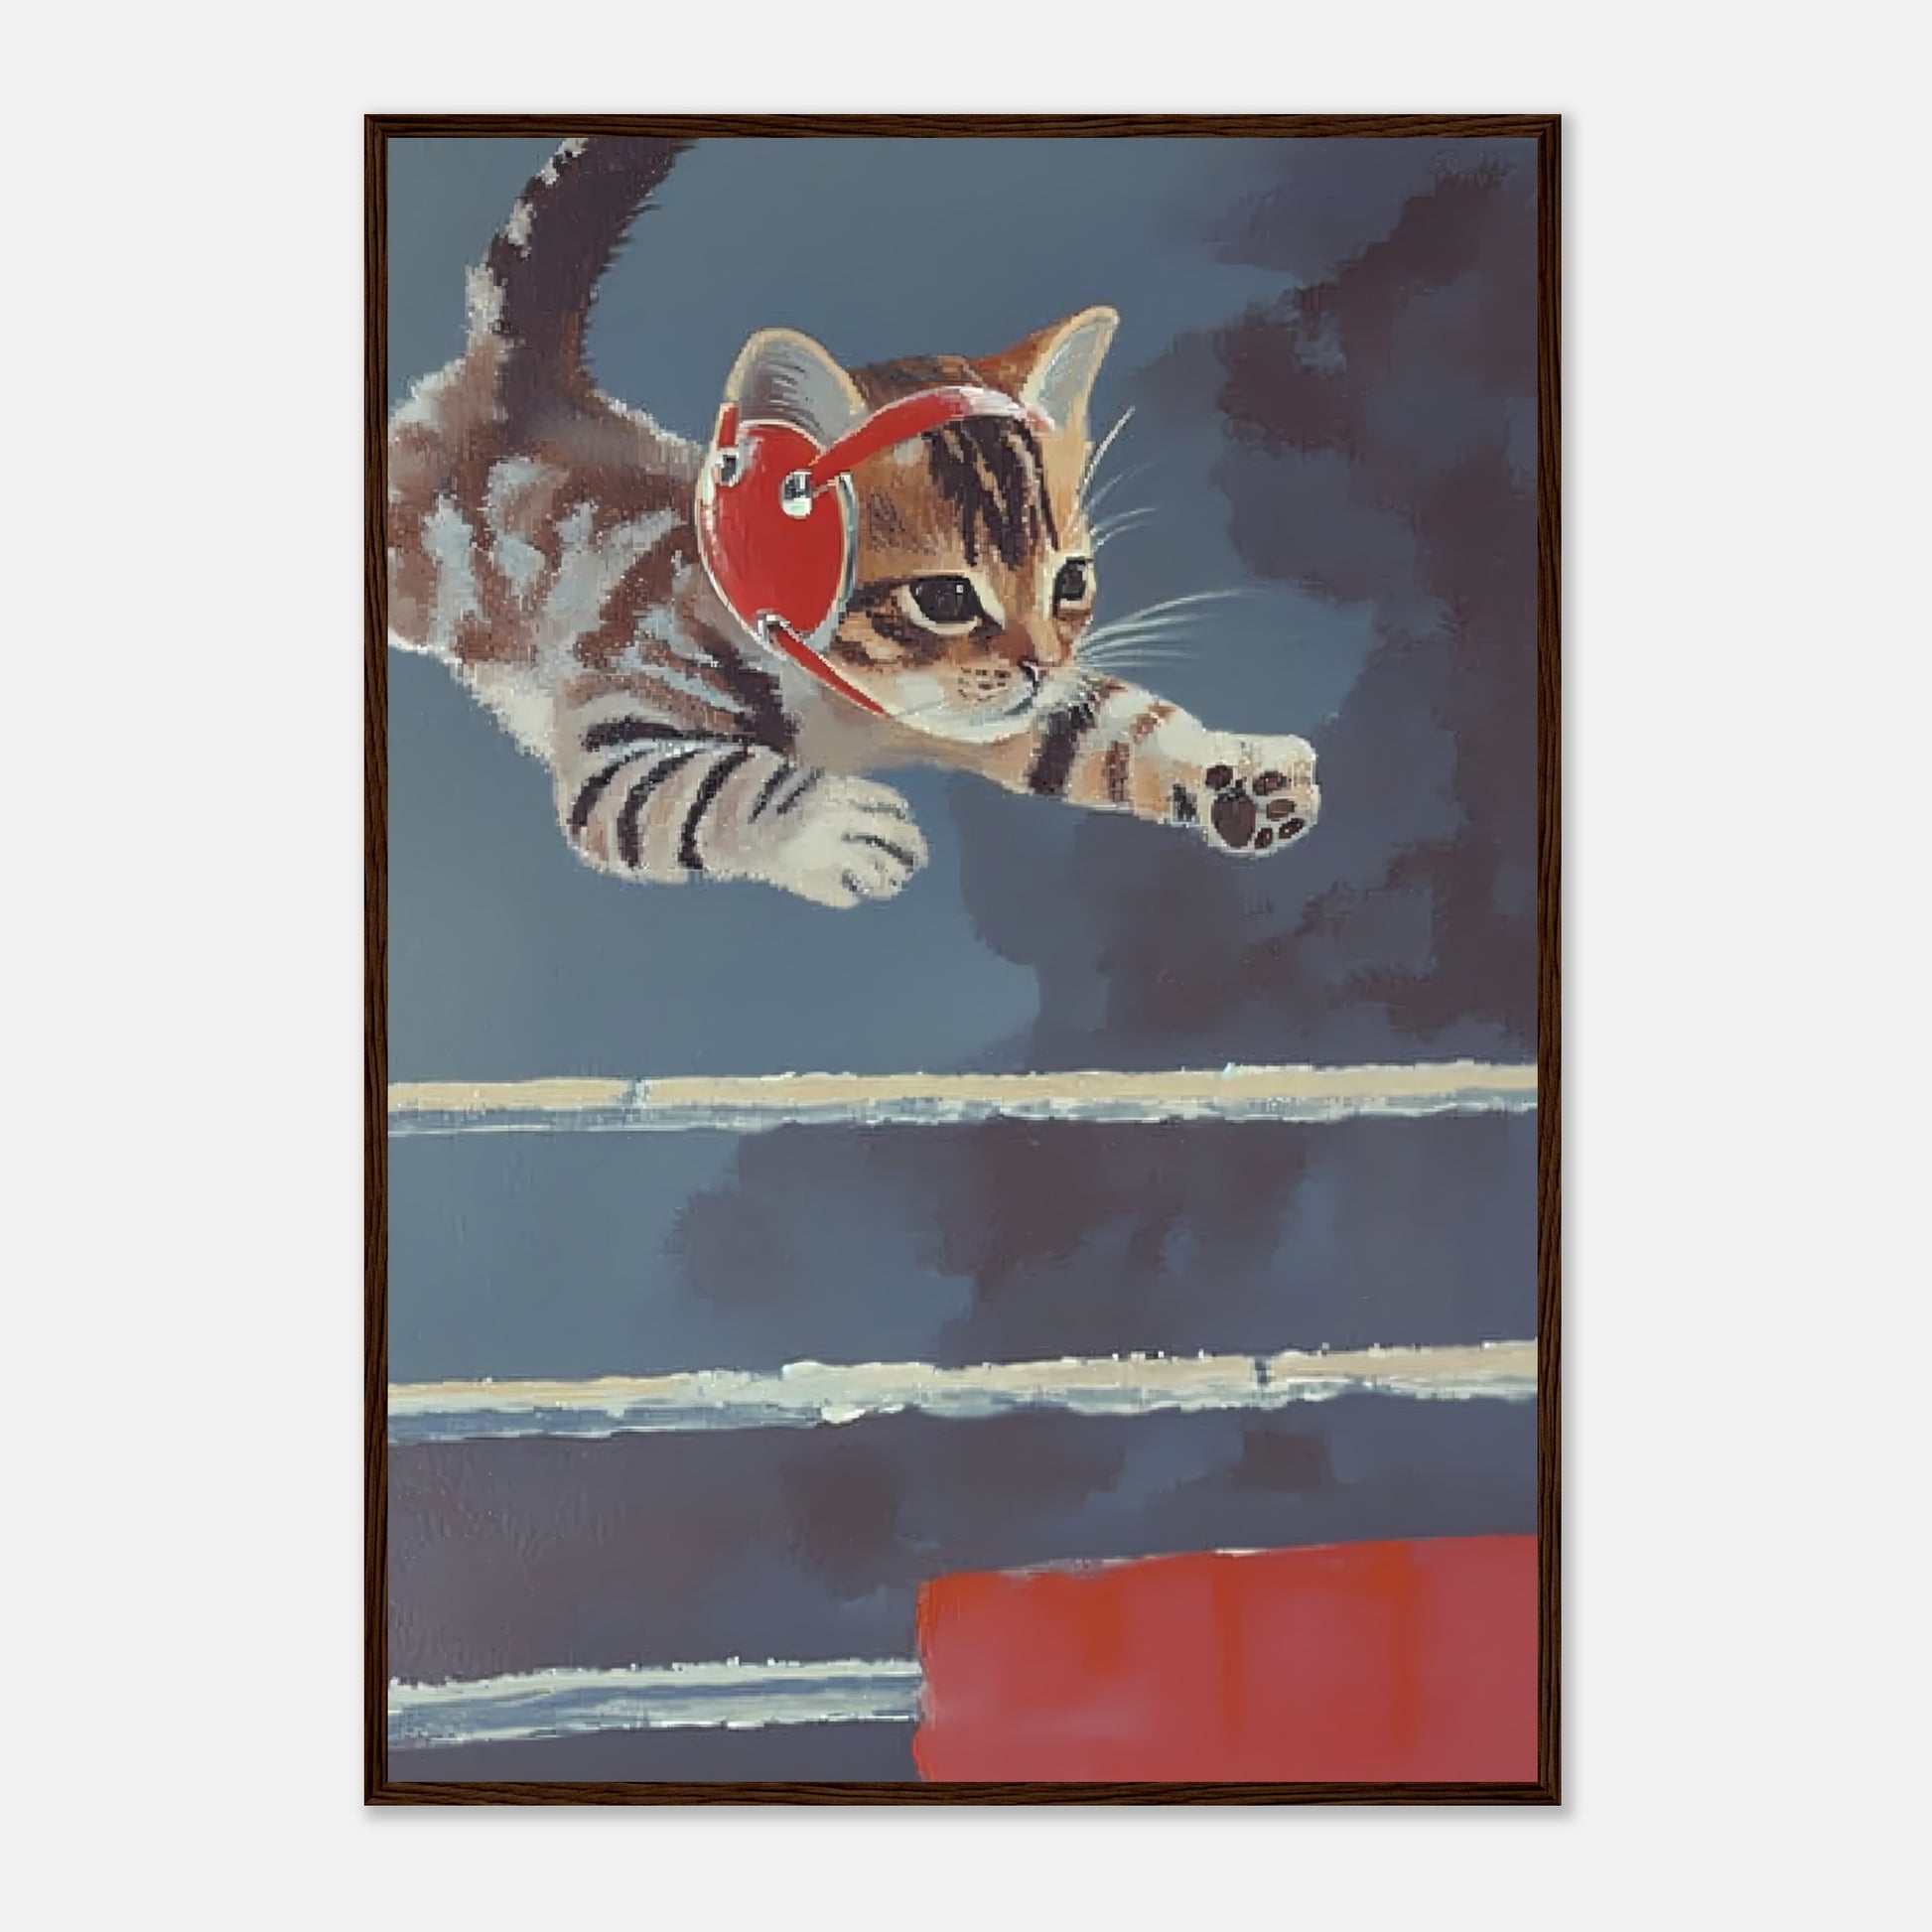 A painting of a cat with headphones leaping in the air against a blue background.